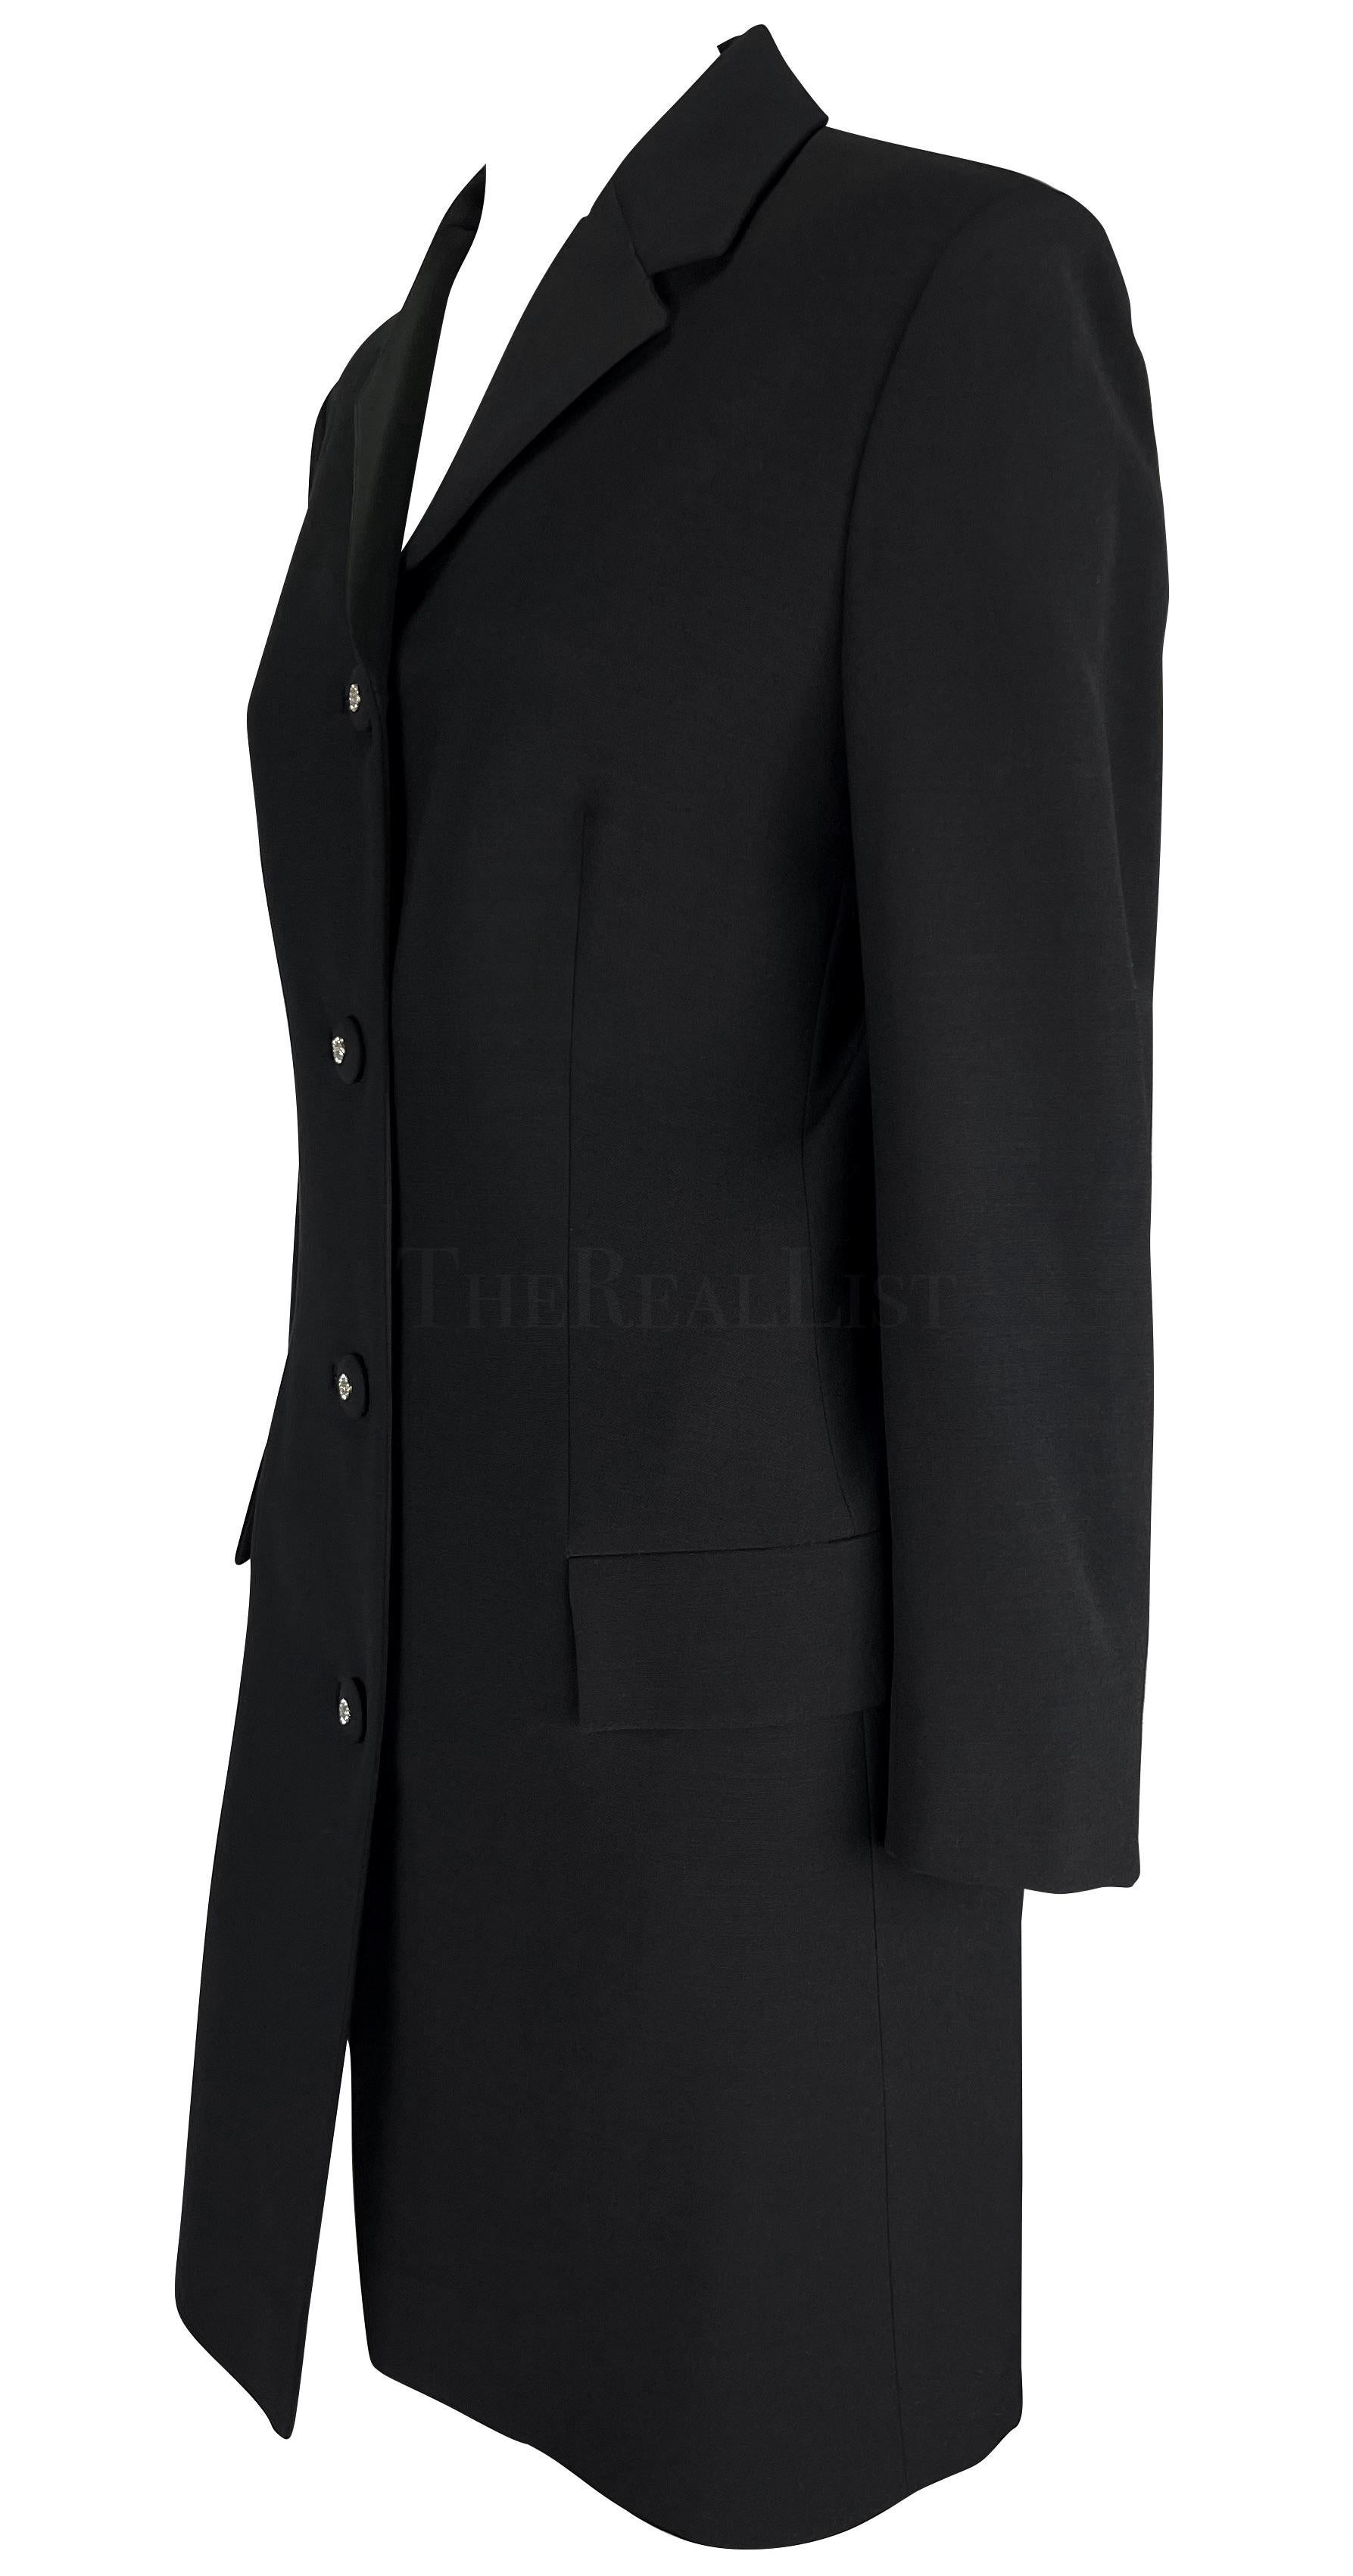 F/W 1996 Gianni Versace Couture Rhinestone Medusa Black Wool Coat In Excellent Condition For Sale In West Hollywood, CA